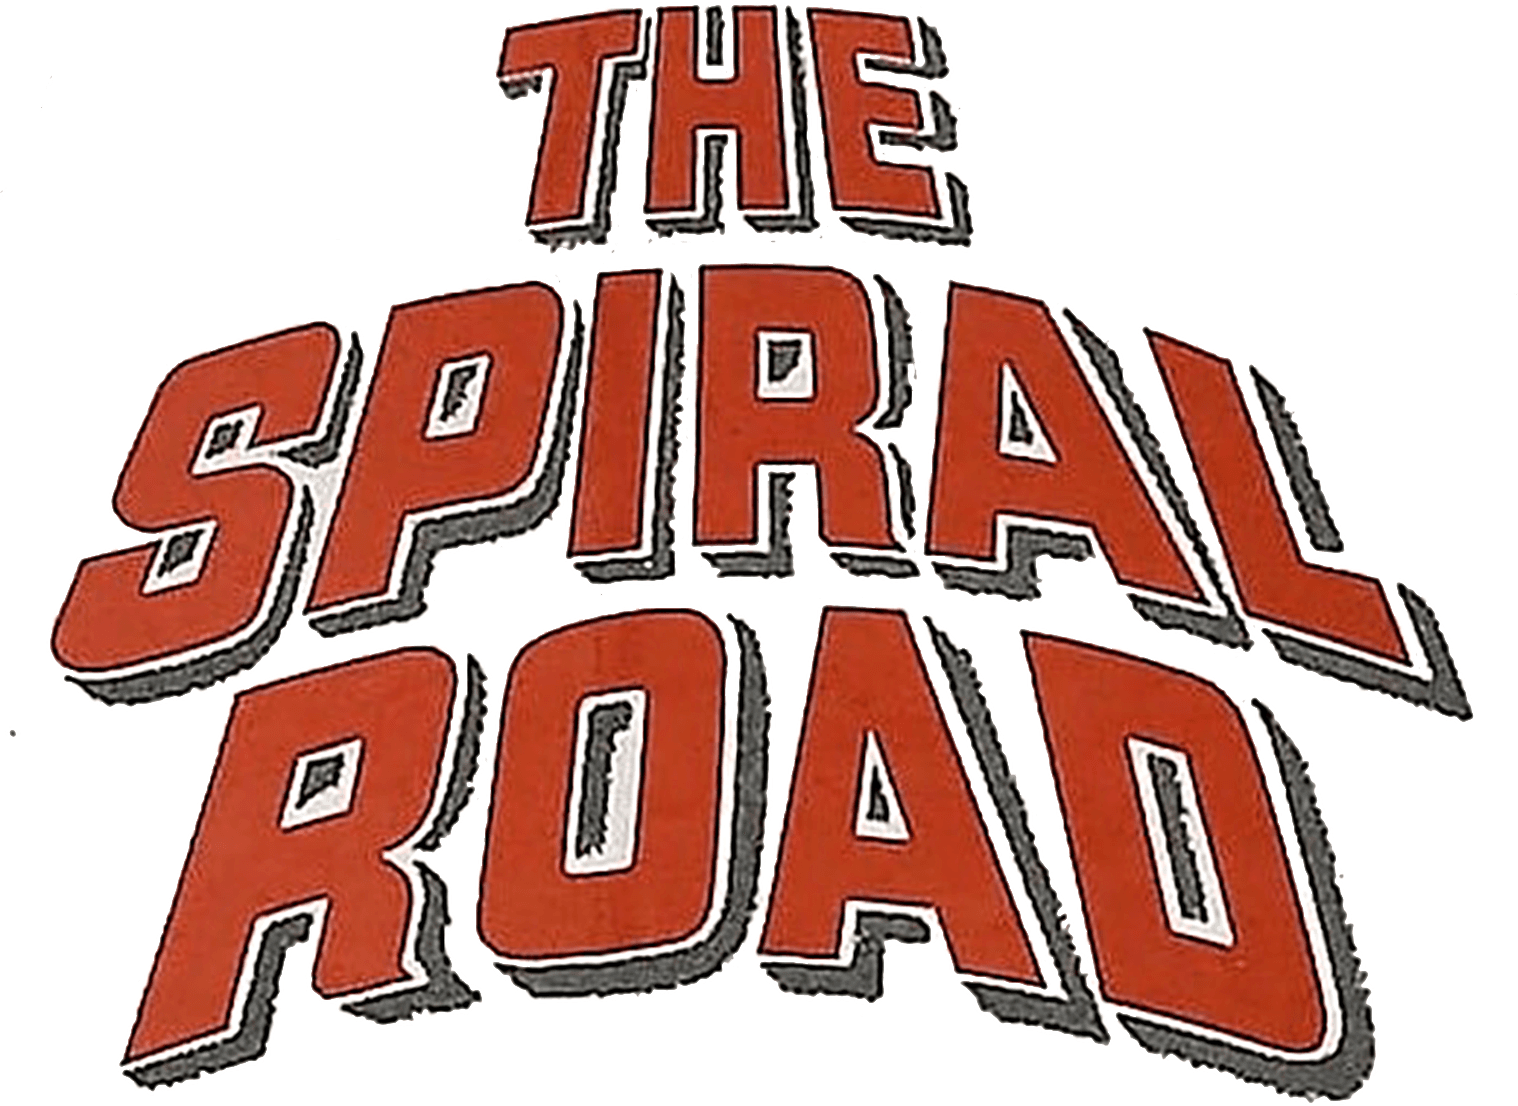 The Spiral Road logo